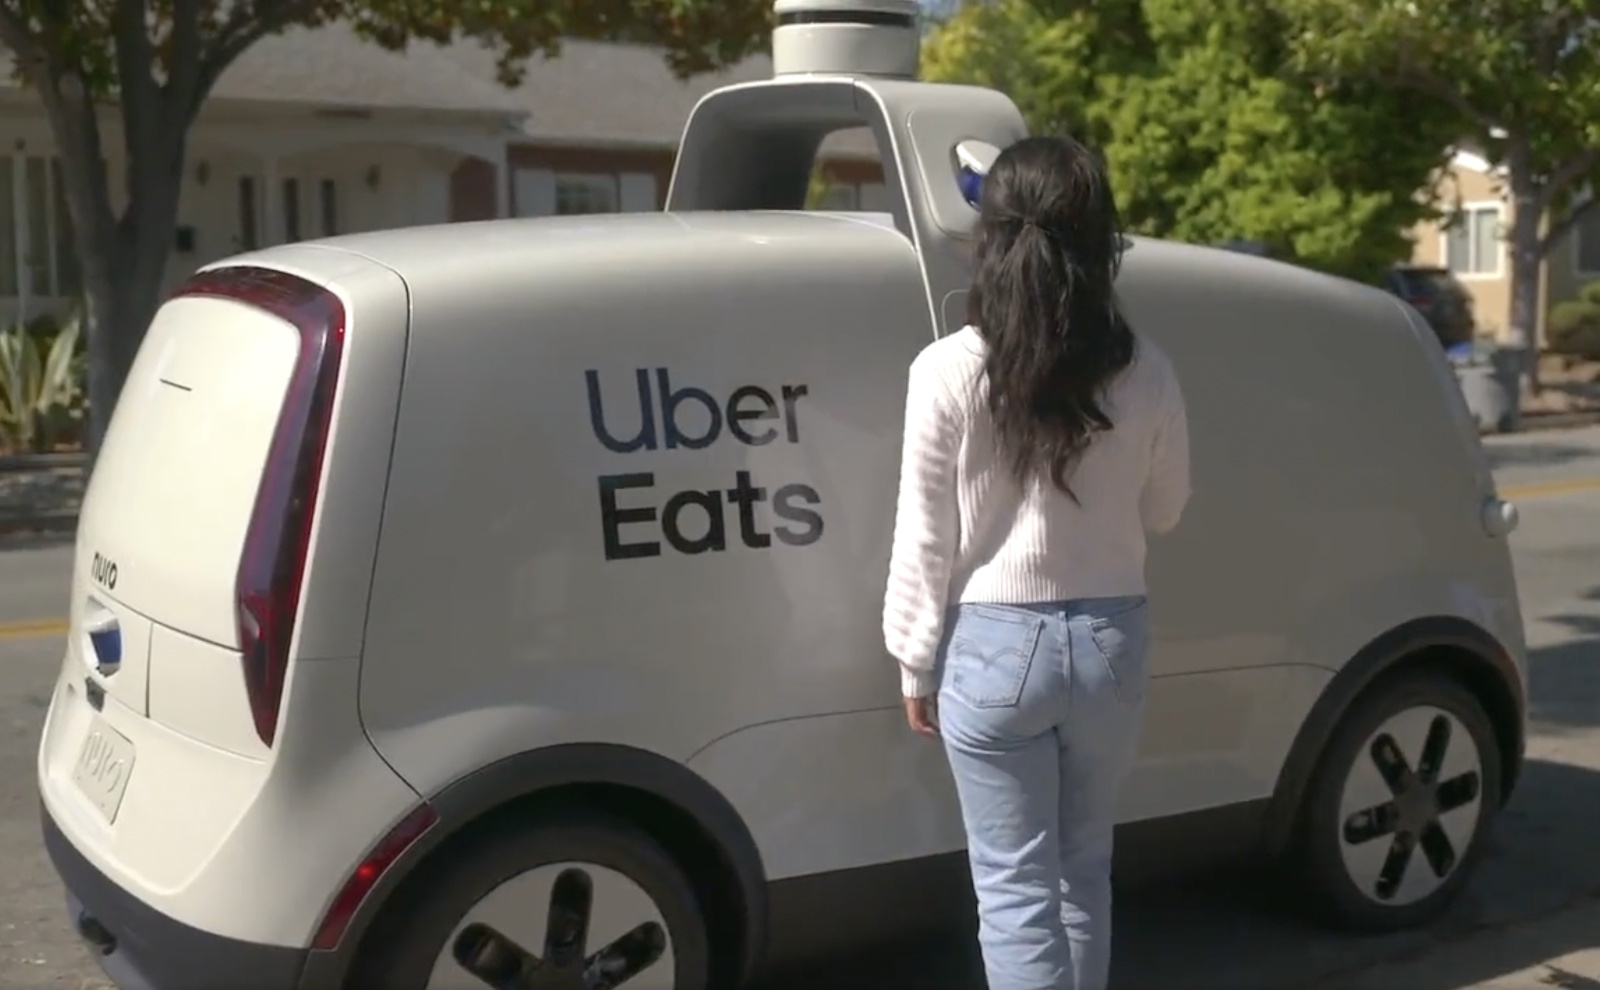 Uber Eats and Nuro are making autonomous food deliveries in Texas and California